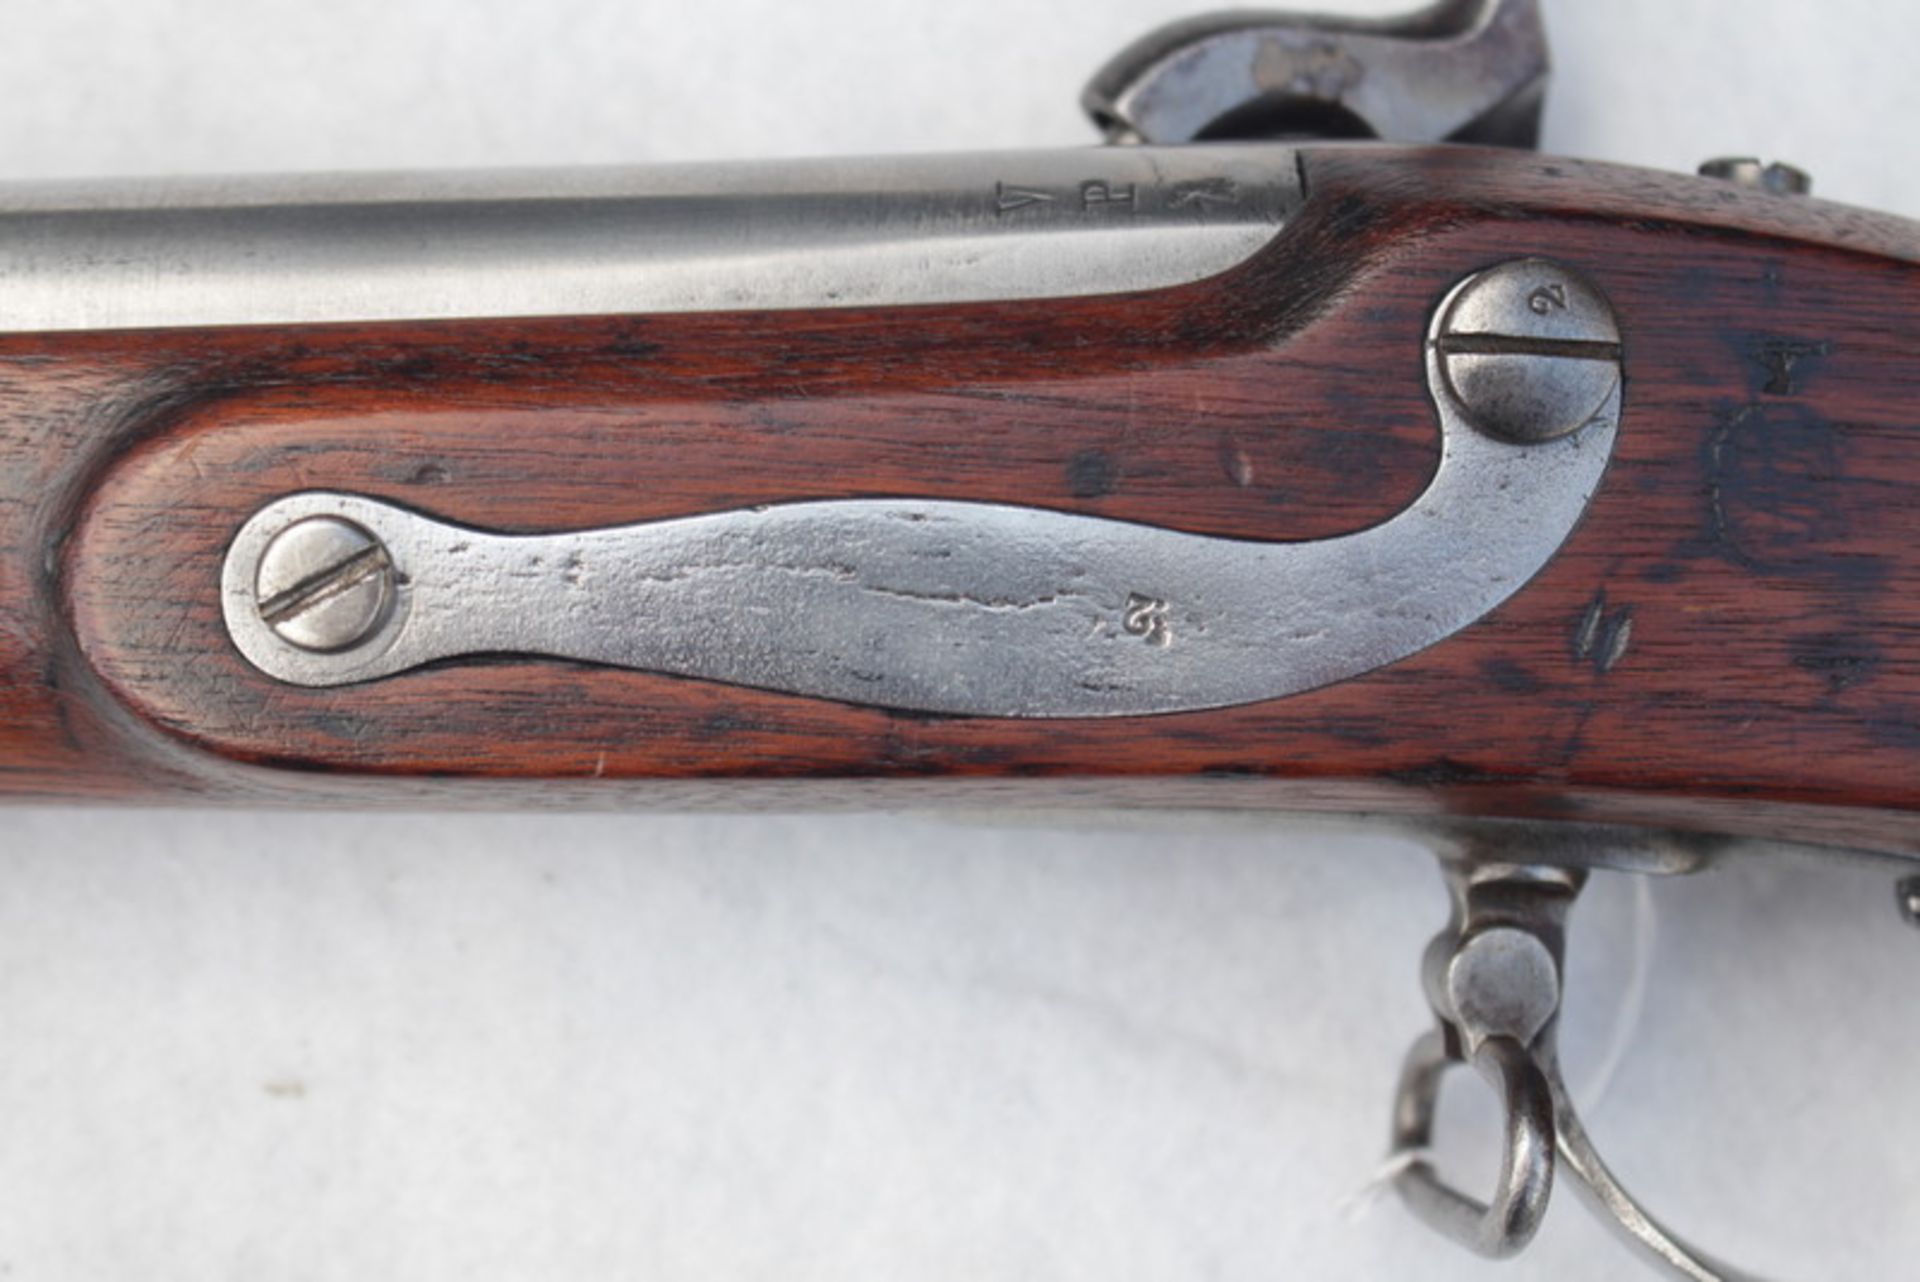 US Model 1822 Harpers Ferry Conversion Musket, American Civil War - Image 8 of 11